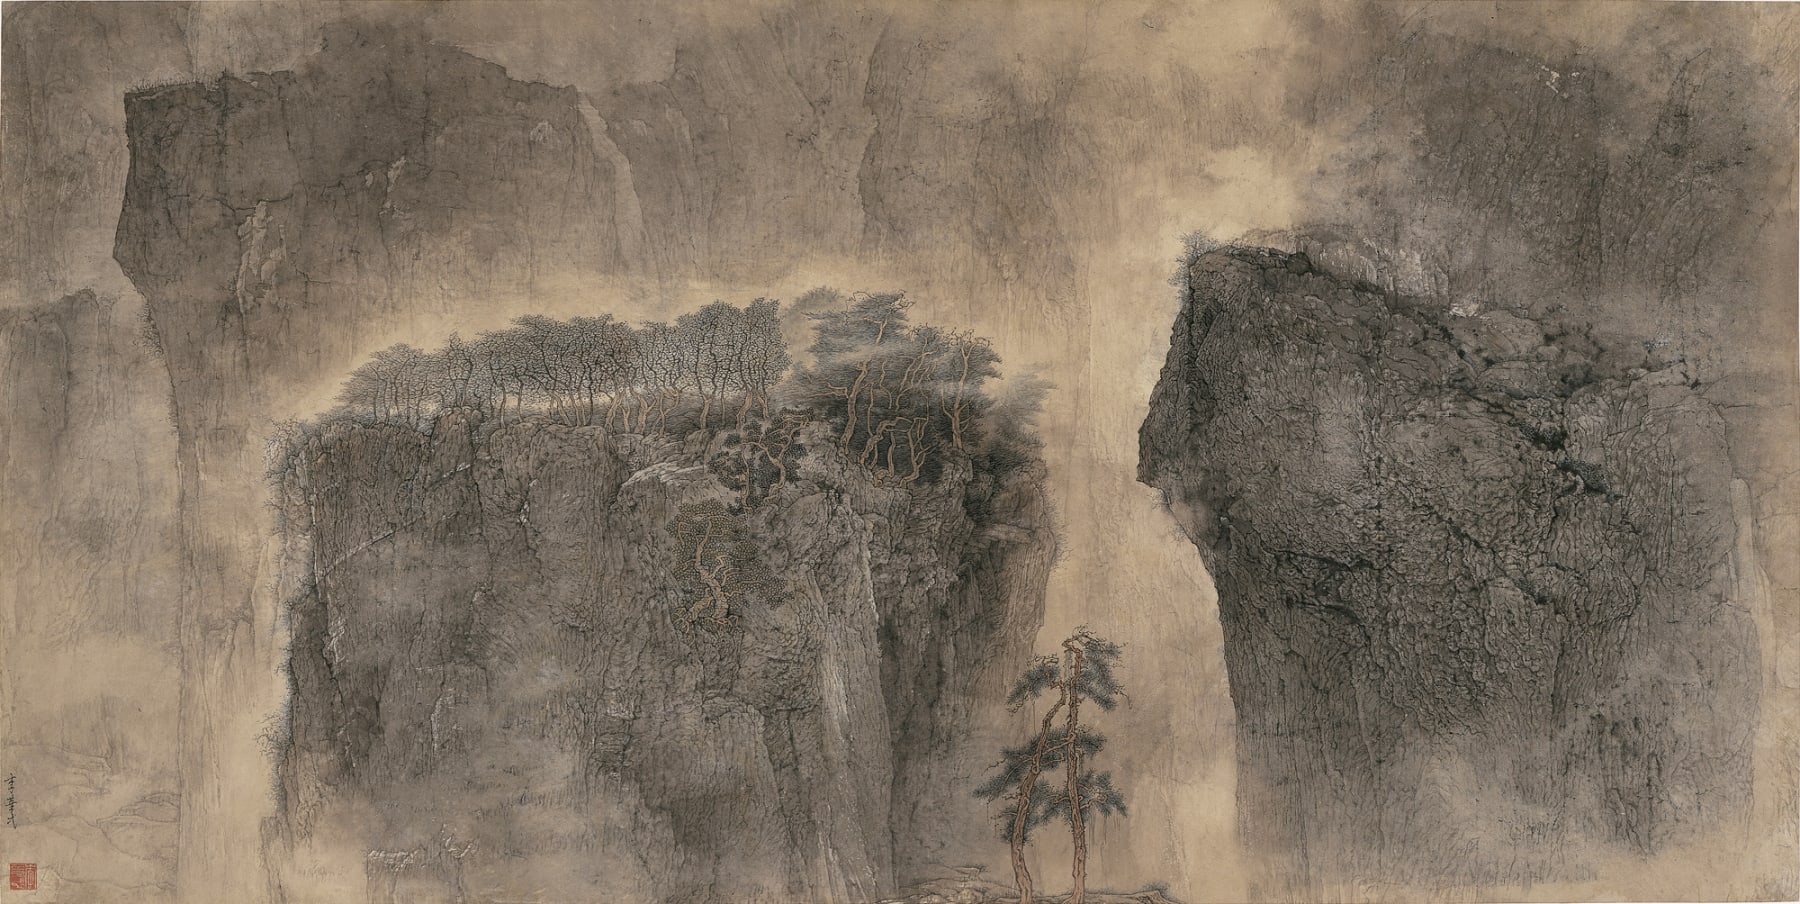 Li Huayi 李華弌, Two Trees at the Mouth of the Valley 《幽谷雙雄》, 1996